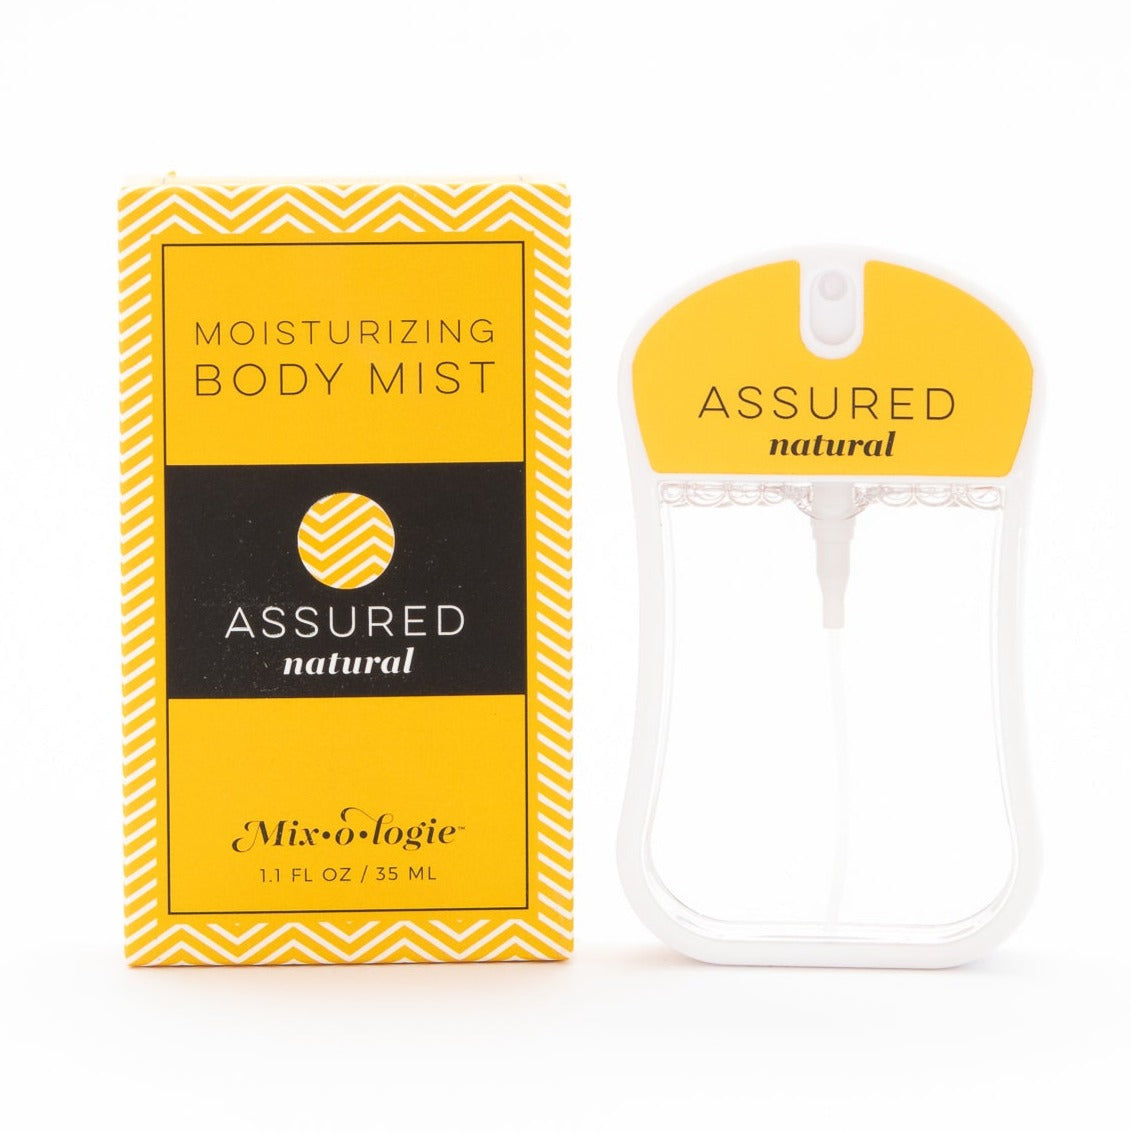 Moisturizing Body Mist scented with Assured Natural in a curved 35 mL plastic spray bottle.